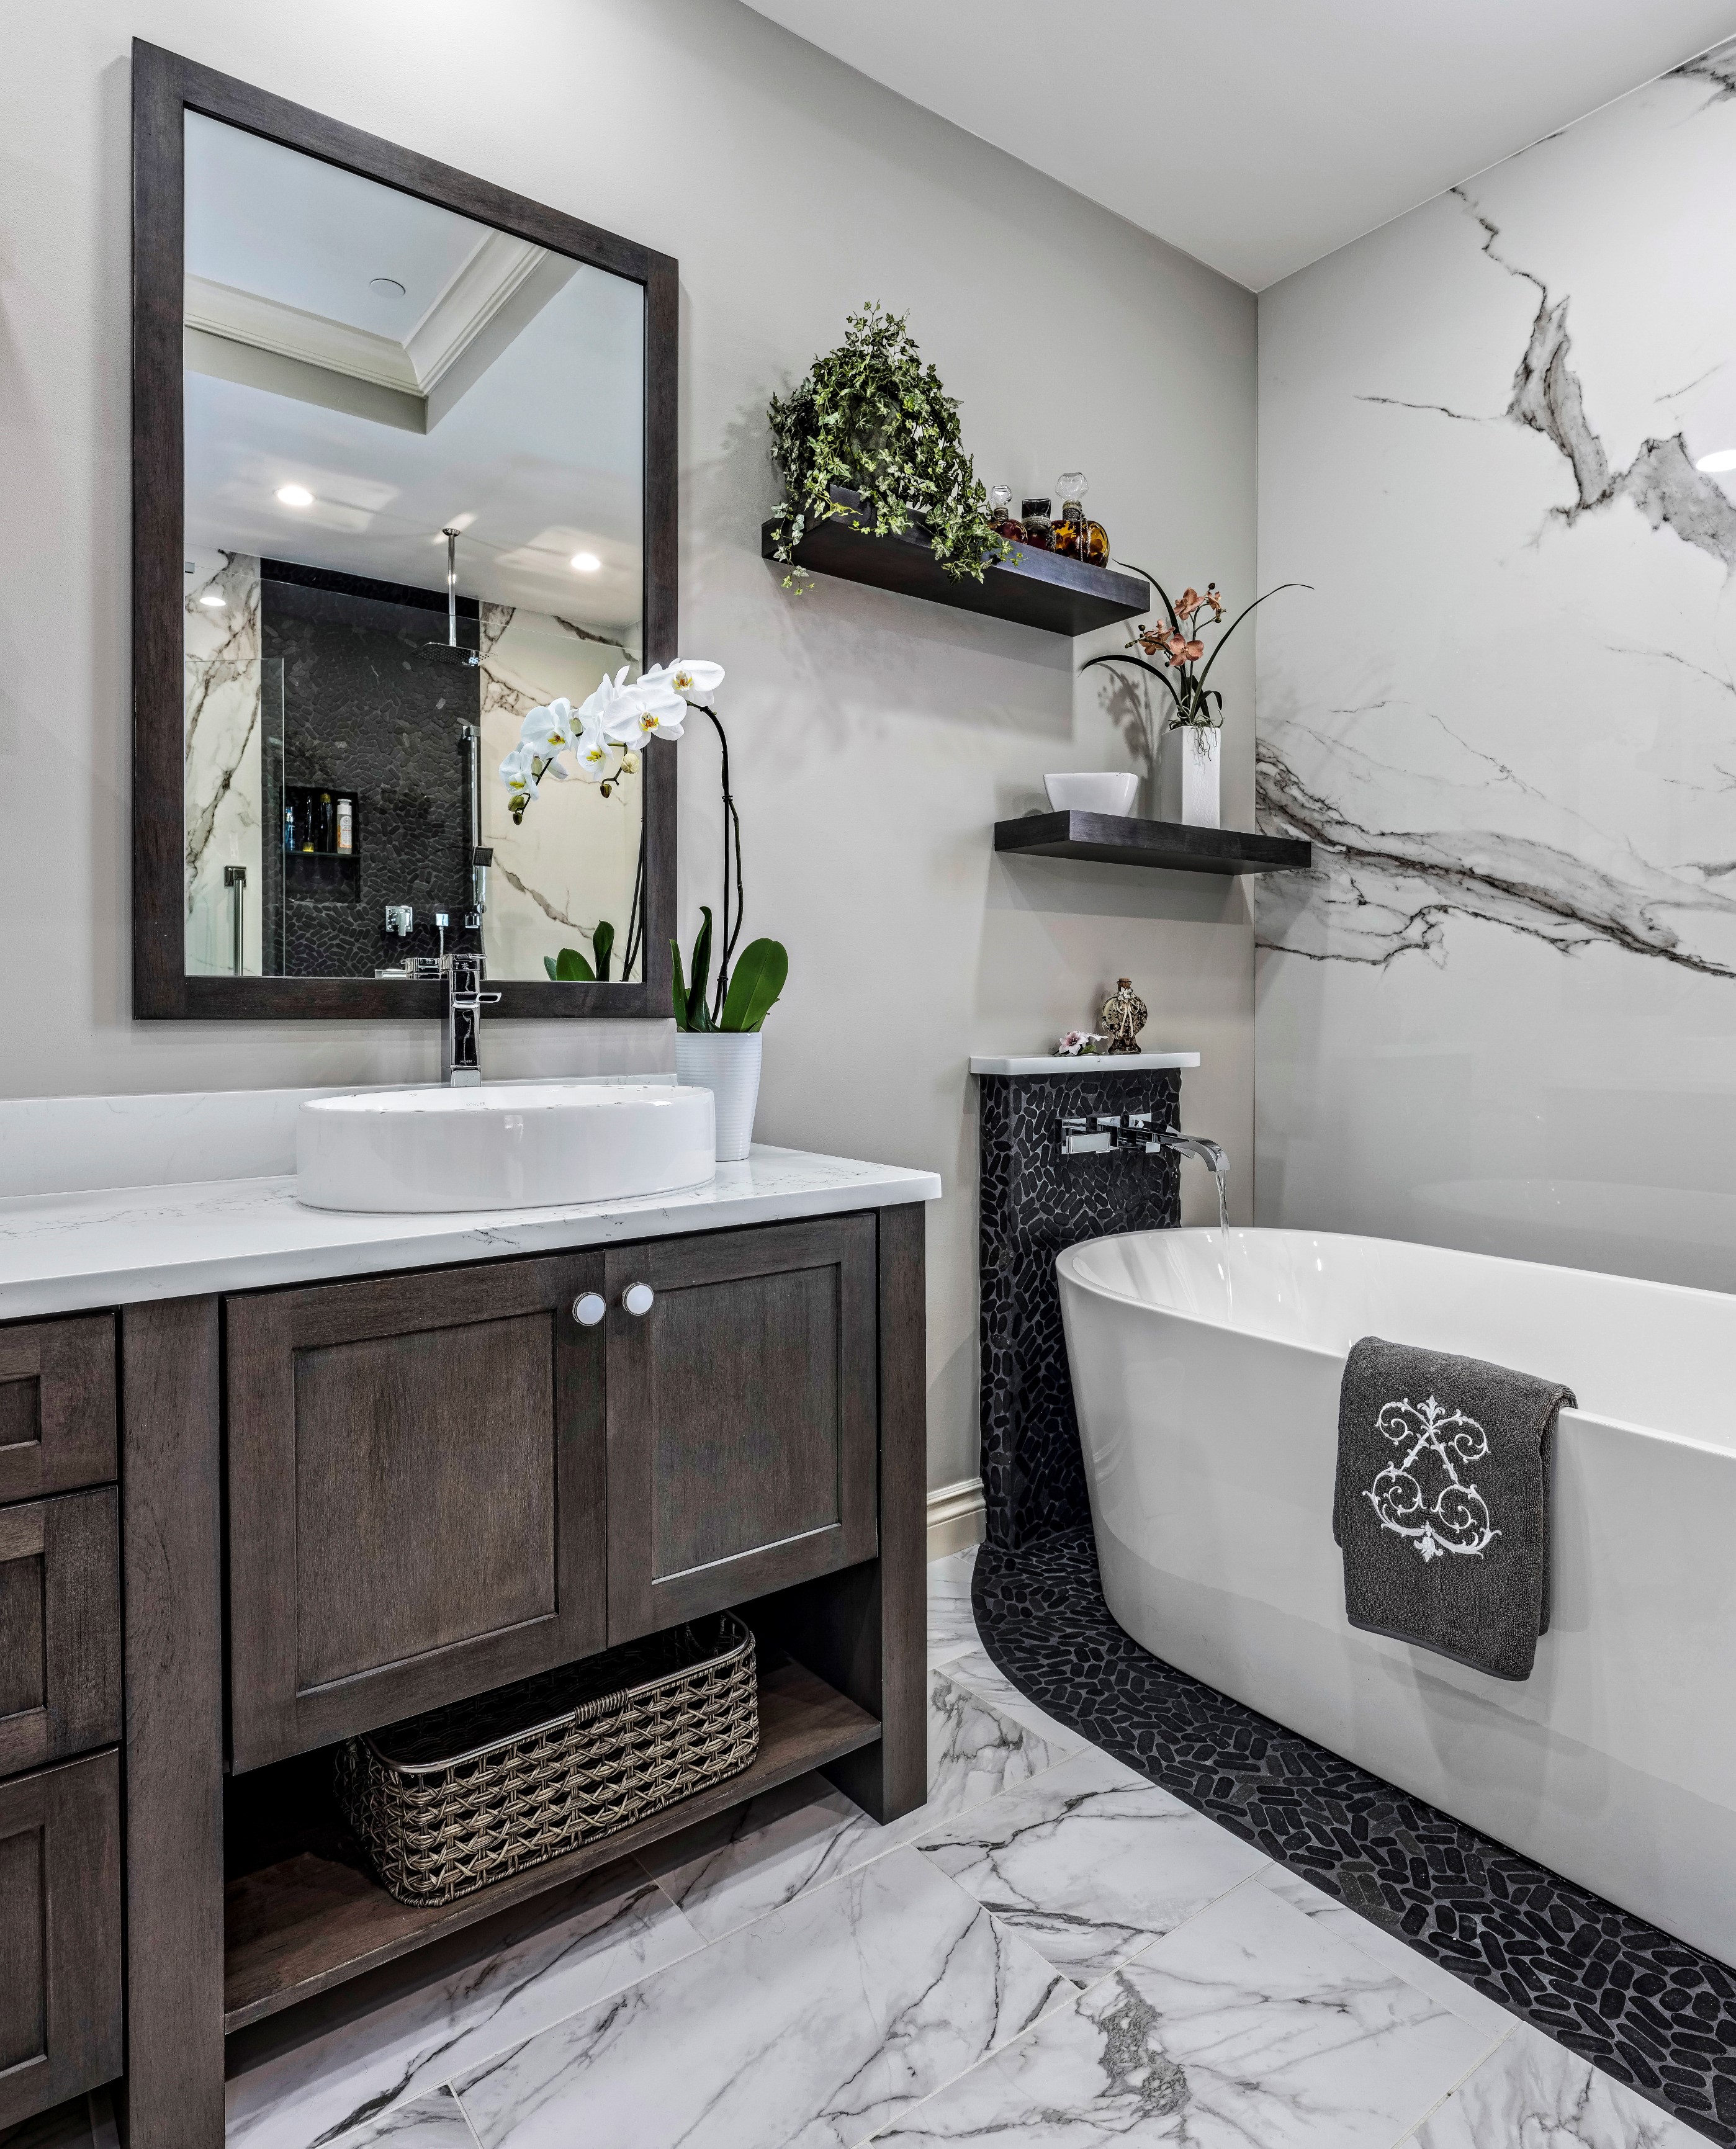 Bathroom Remodeling Typically Cost, How Much Would It Cost For A Bathroom Remodel